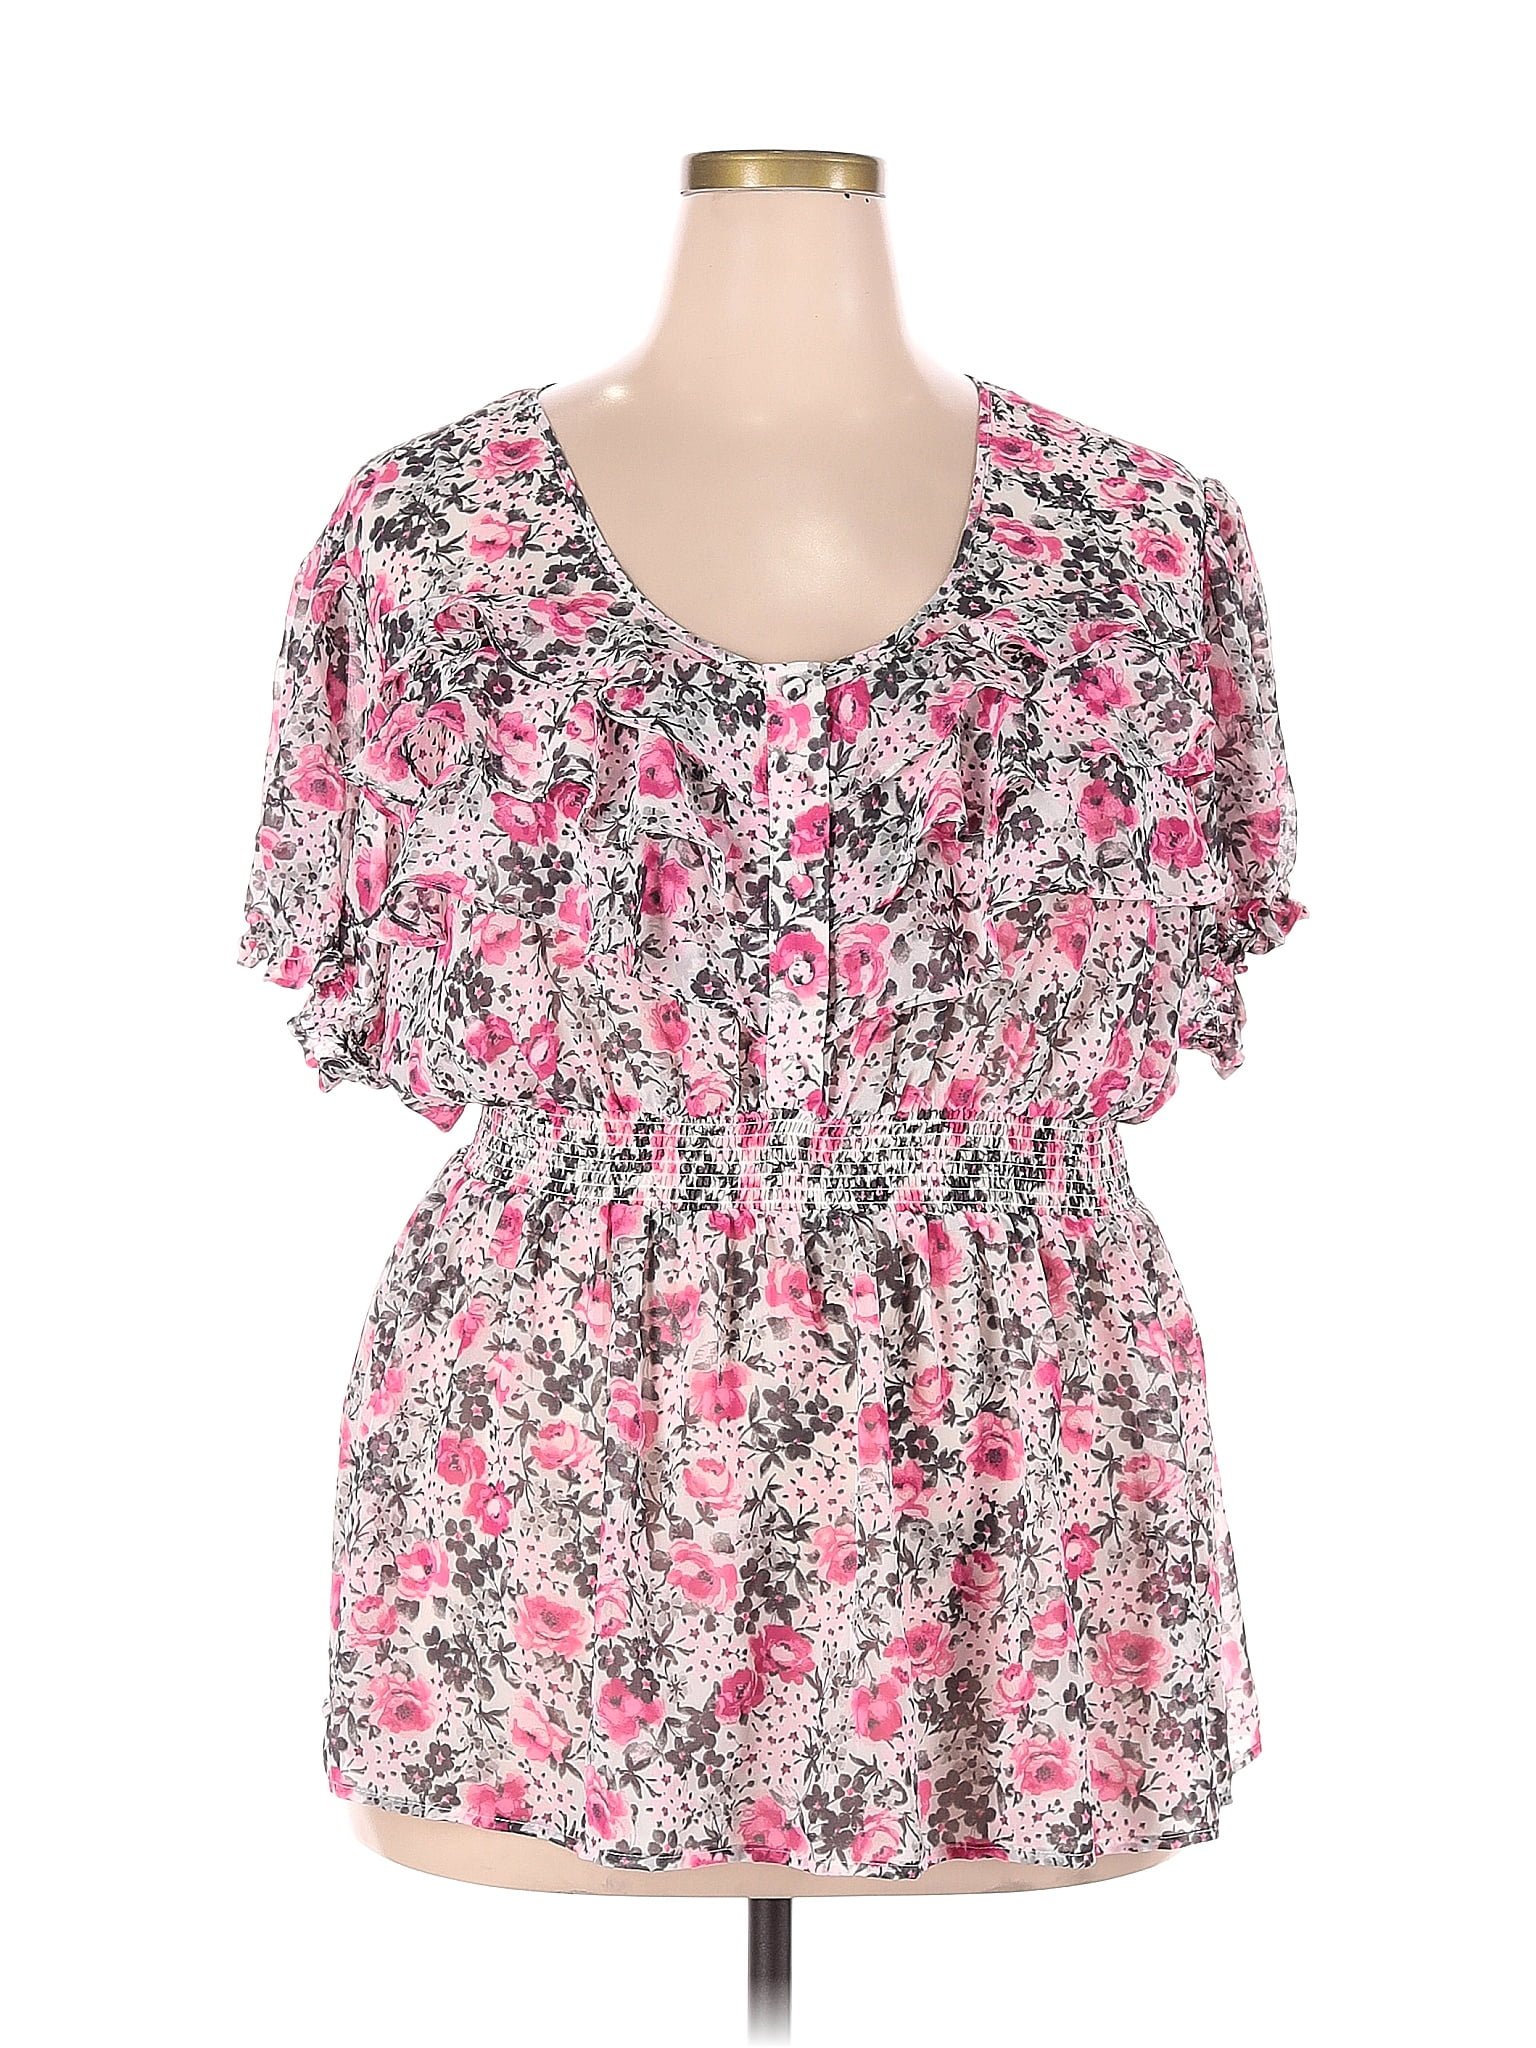 Torrid 100% Polyester Floral Pink Short Sleeve Blouse Size 3X Plus